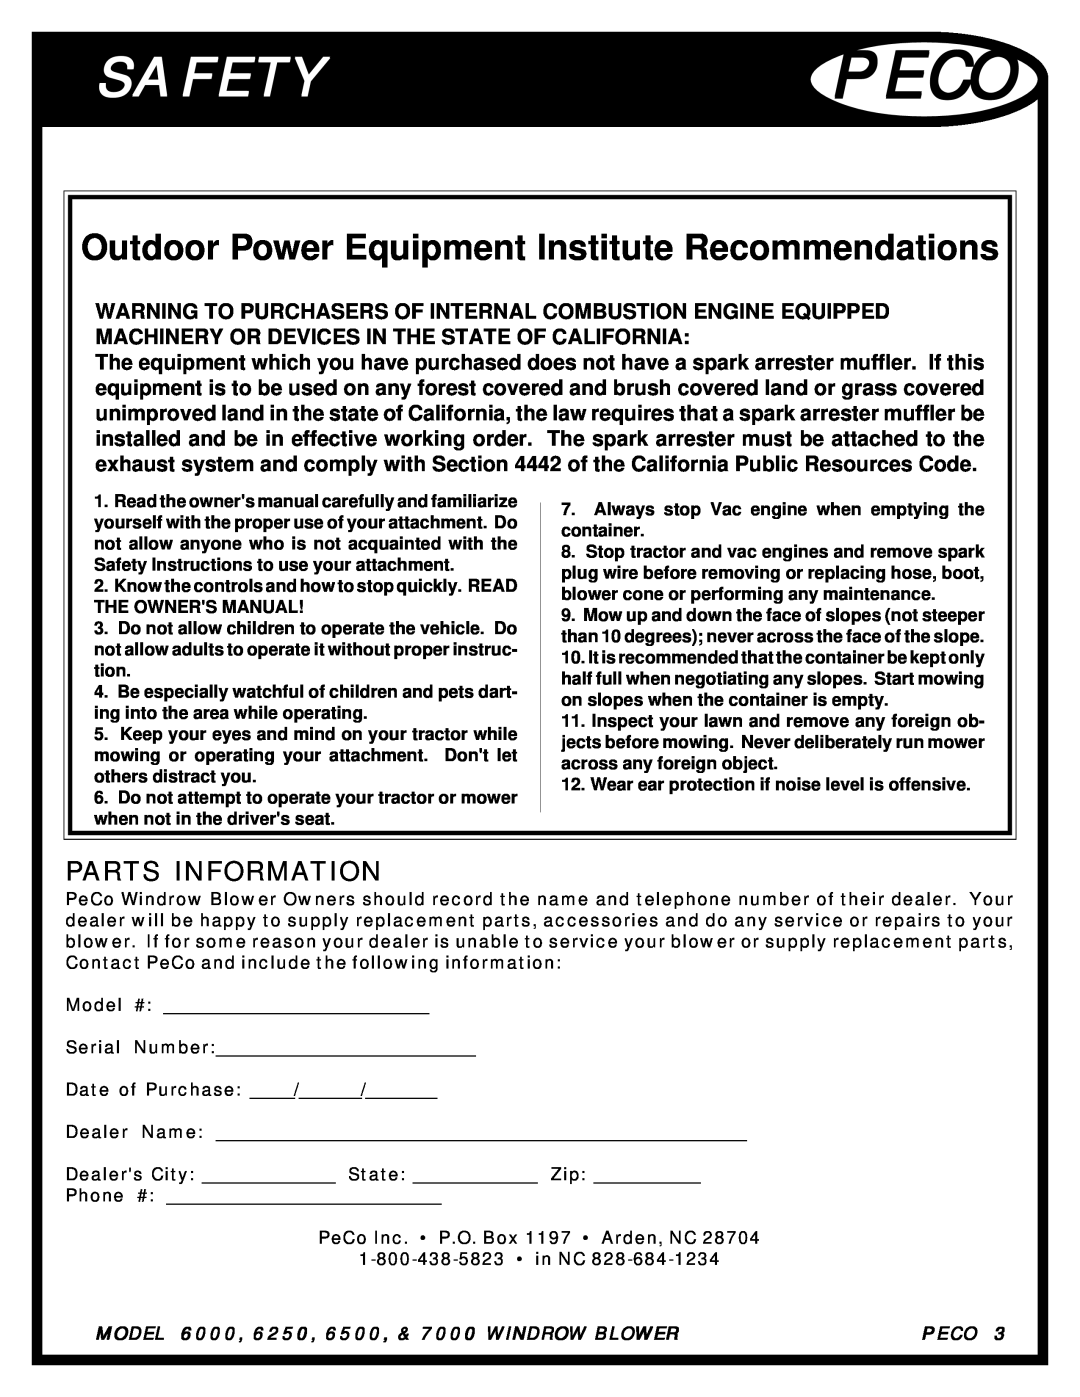 Pecoware 6000 manual Safetypeco, Outdoor Power Equipment Institute Recommendations, Parts Information 